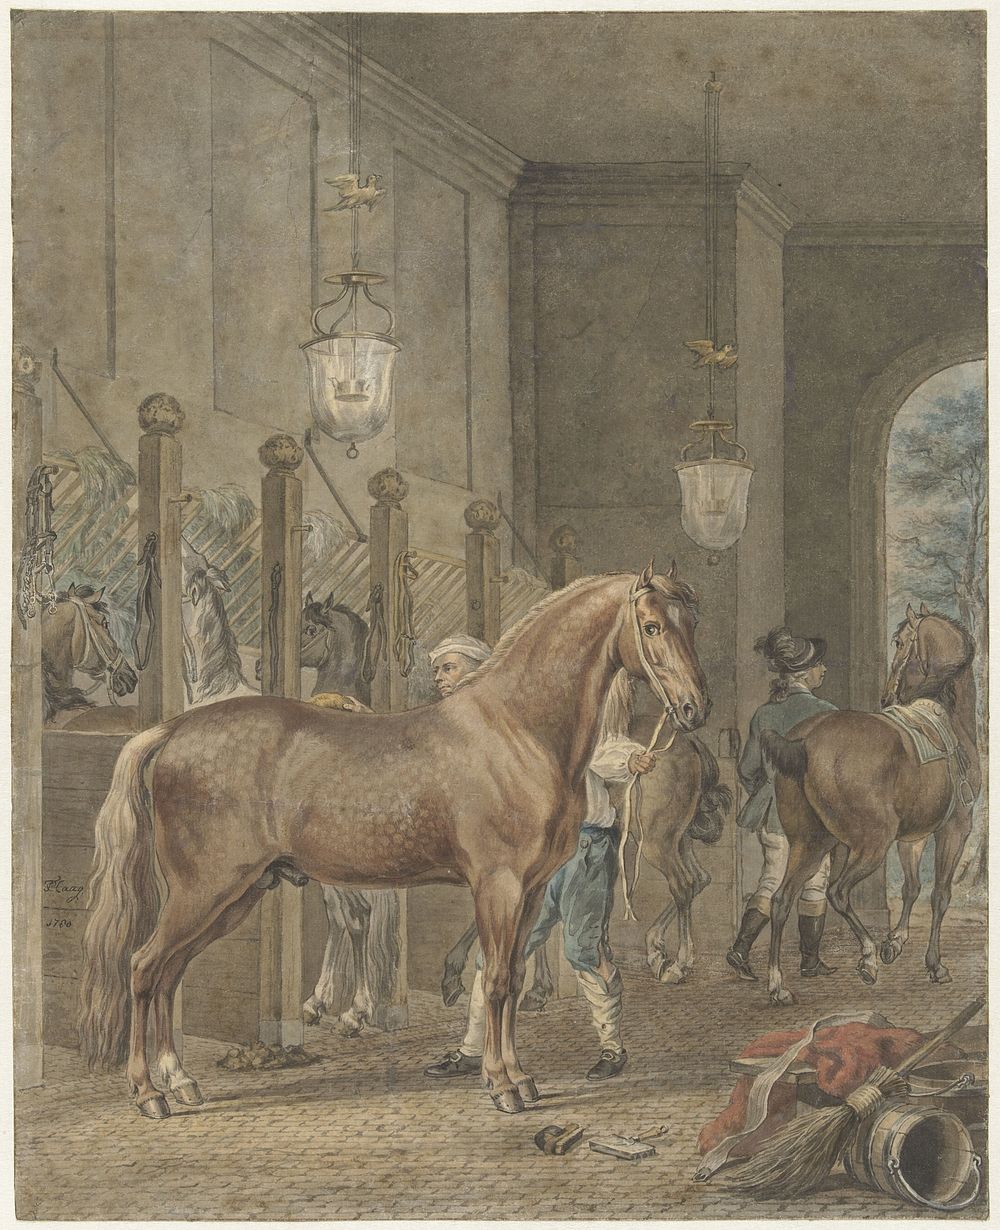 Stable Interior (1780) by Tethart Philip Christian Haag